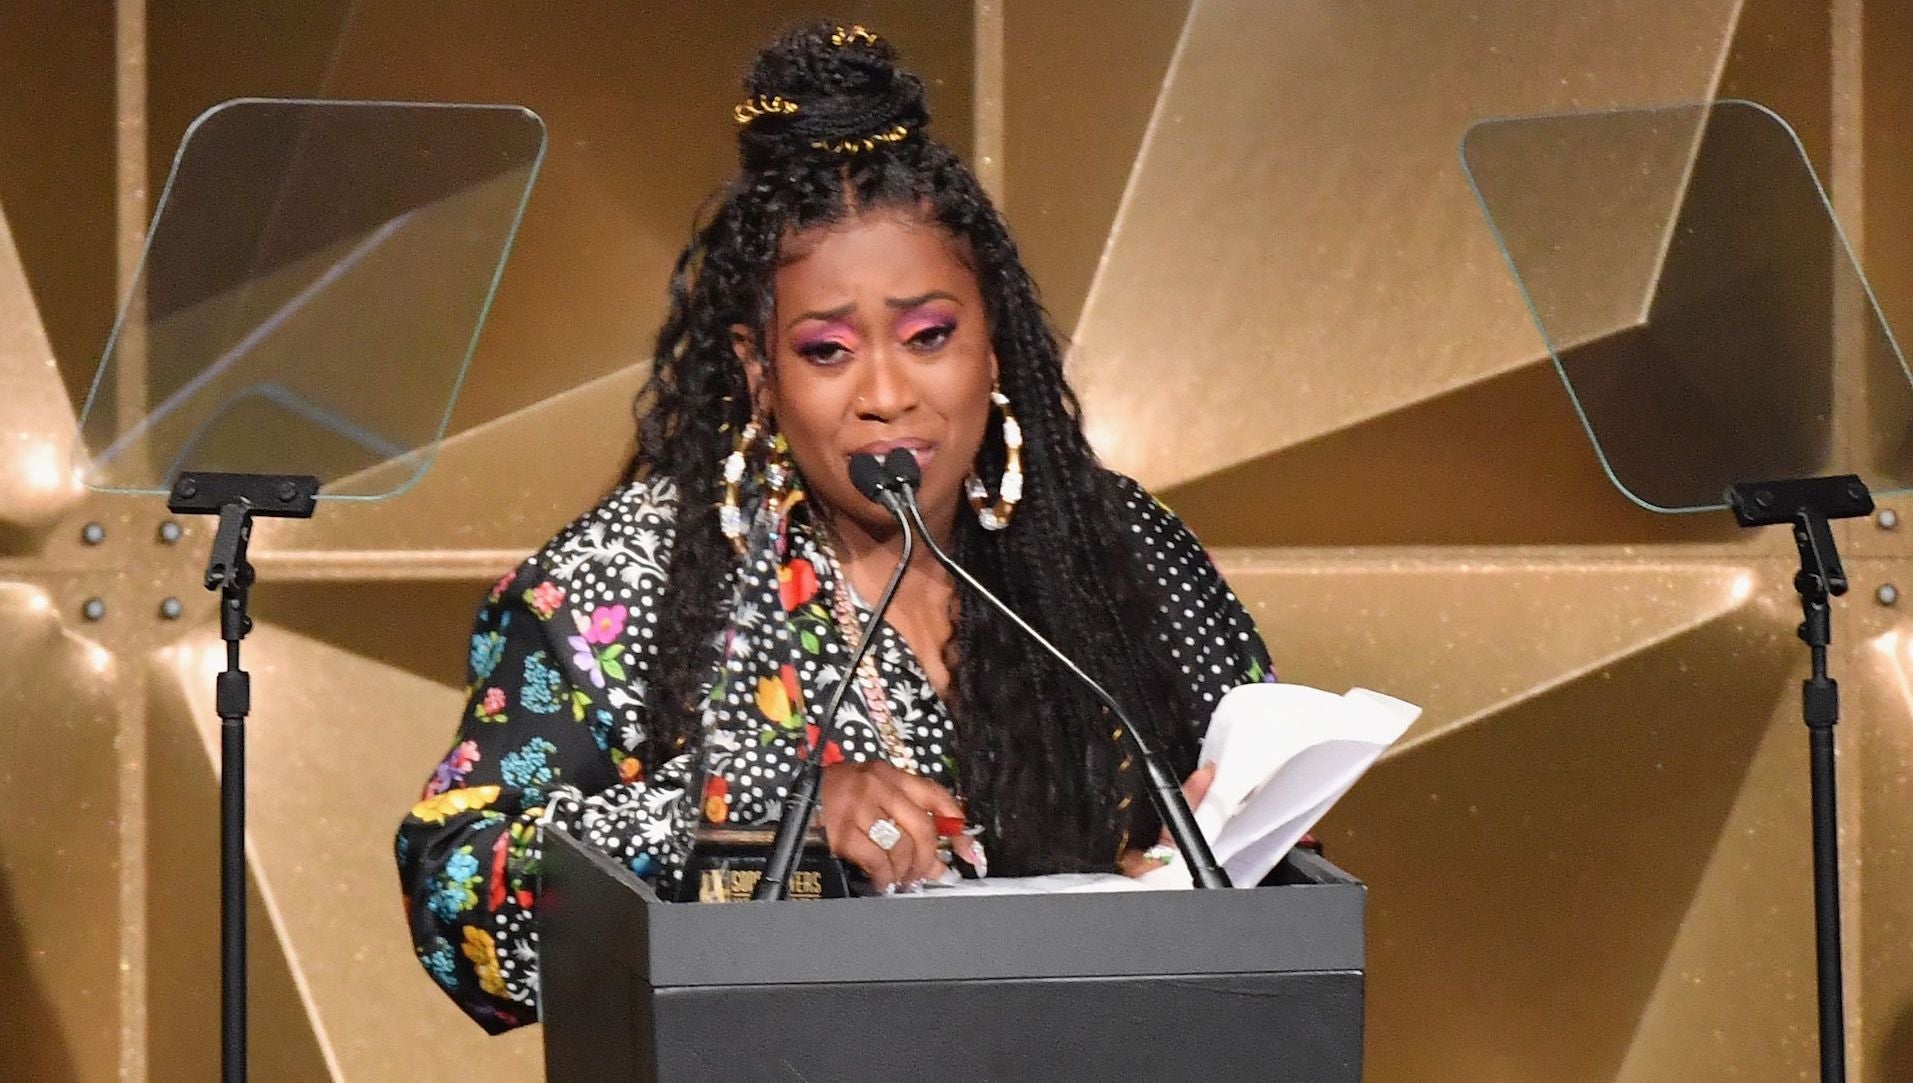 Missy Elliott Tears Up While Making History, Becoming First Female Rapper To Be Inducted Into Songwriters Hall Of Fame